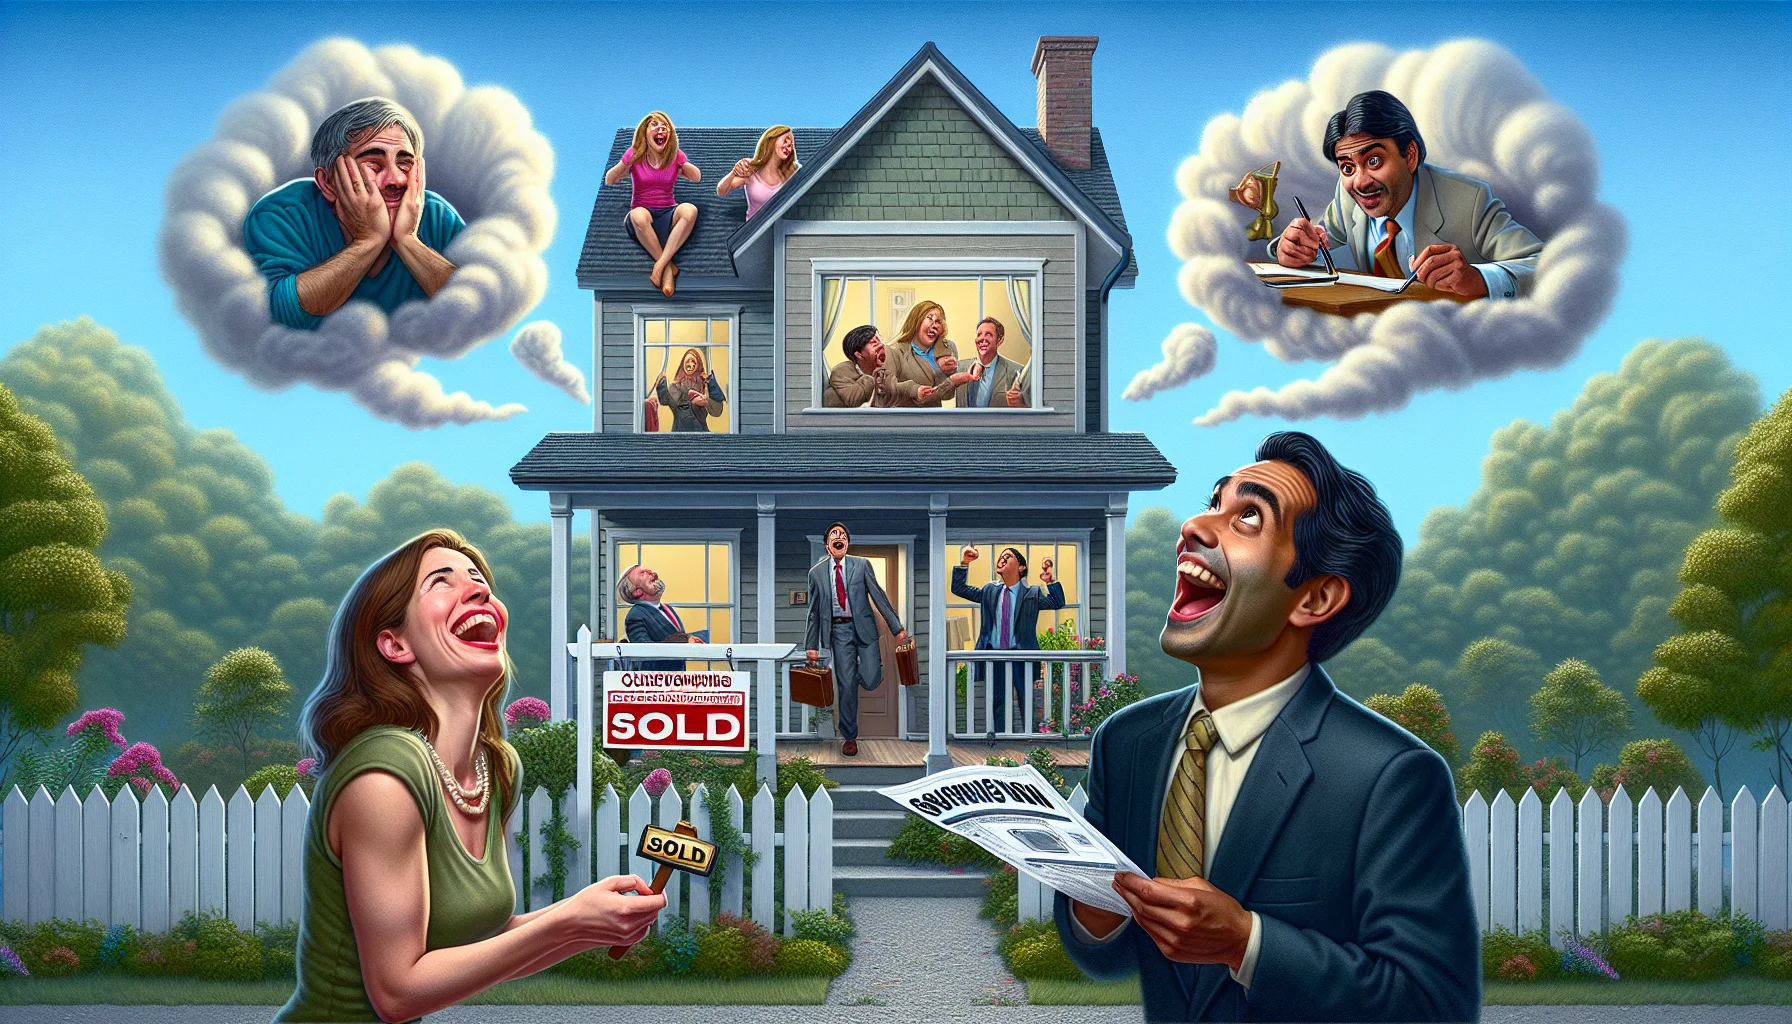 Imagine an impeccably detailed image that humorously illustrates the advantages of homeownership in a perfect real estate scenario. In the center of the scene, a gleaming, spacious two-storey house with a charming garden. A Caucasian woman and a Hispanic man are exuberantly celebrating their first house purchase in front of a 'Sold' sign. Nearby, an overjoyed South Asian mortgage broker clutches a favorable property appraisal report. Their expressions, exaggerated for comedic effect, contrast starkly with renters depicted in the background, peering forlornly from cramped apartment windows. The sky is a serene blue, symbolizing a stable and favorable market. Charmingly unrealized dreams sit within reach.